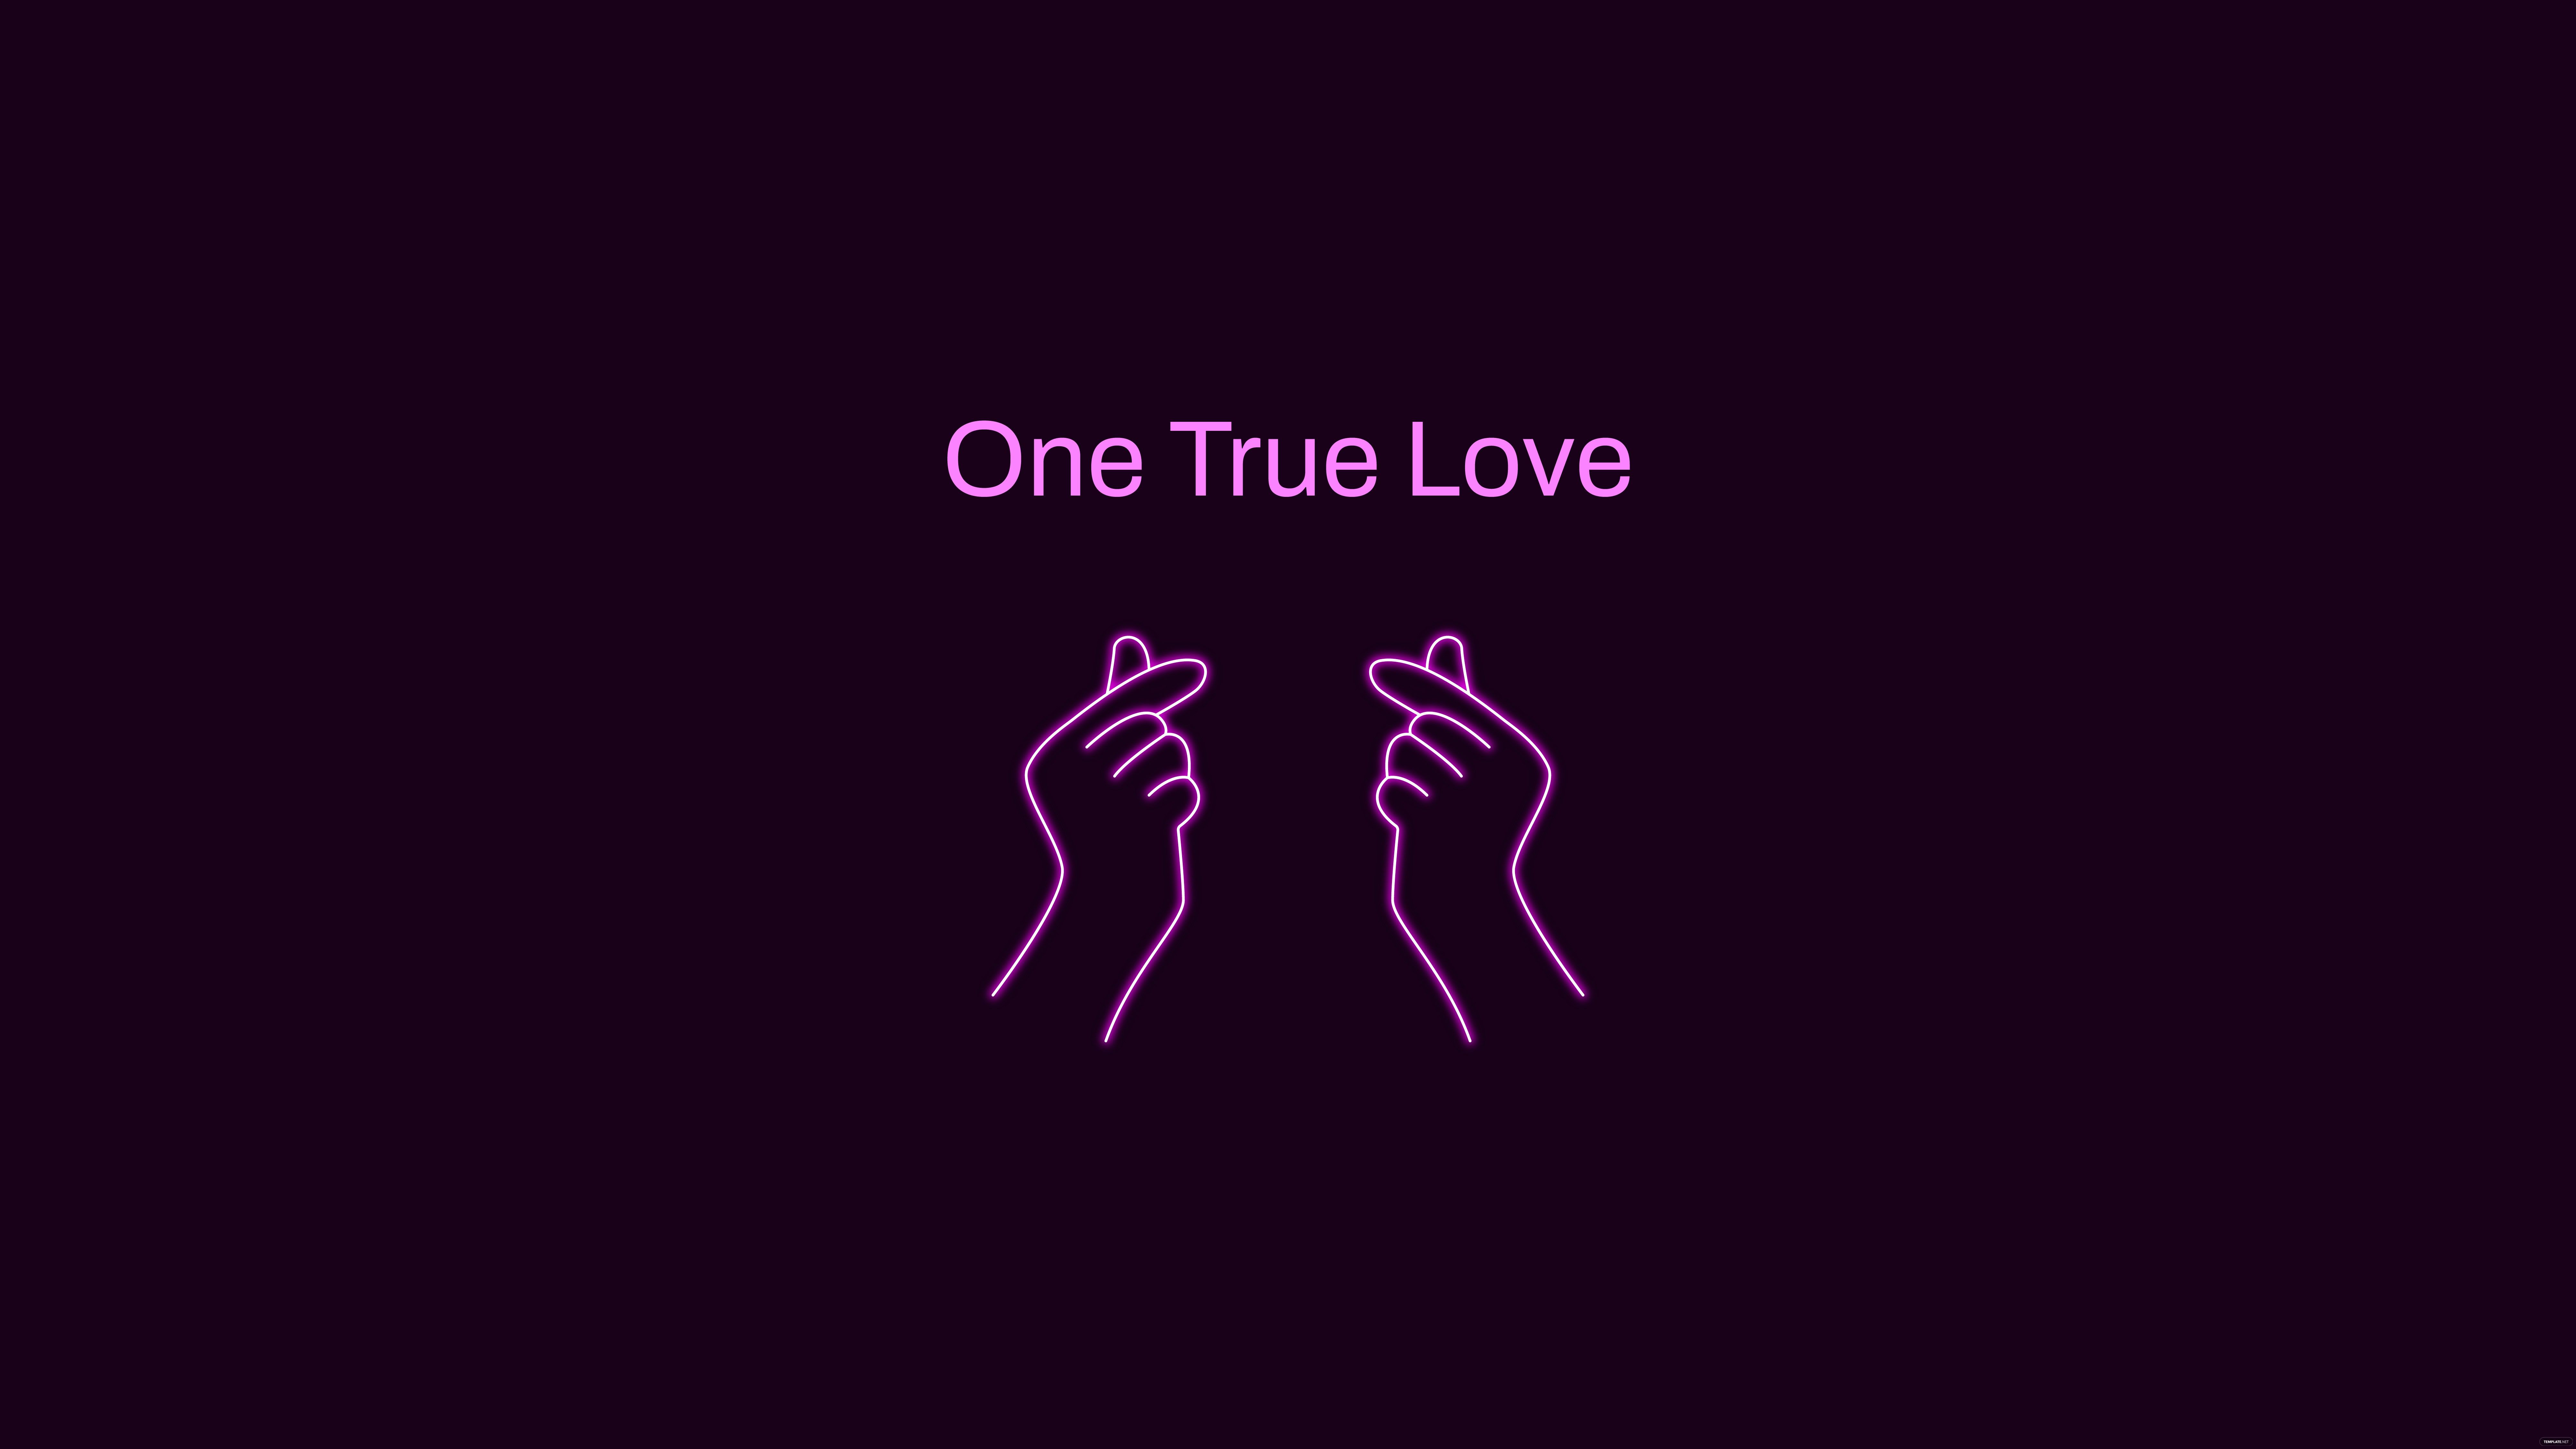 One True Love wallpaper with abstract background. One True Love wallpaper with abstract background. You can use this wallpaper for your Windows and Mac OS computers as well as your Android and iPhone smartphones - Neon, neon purple, purple